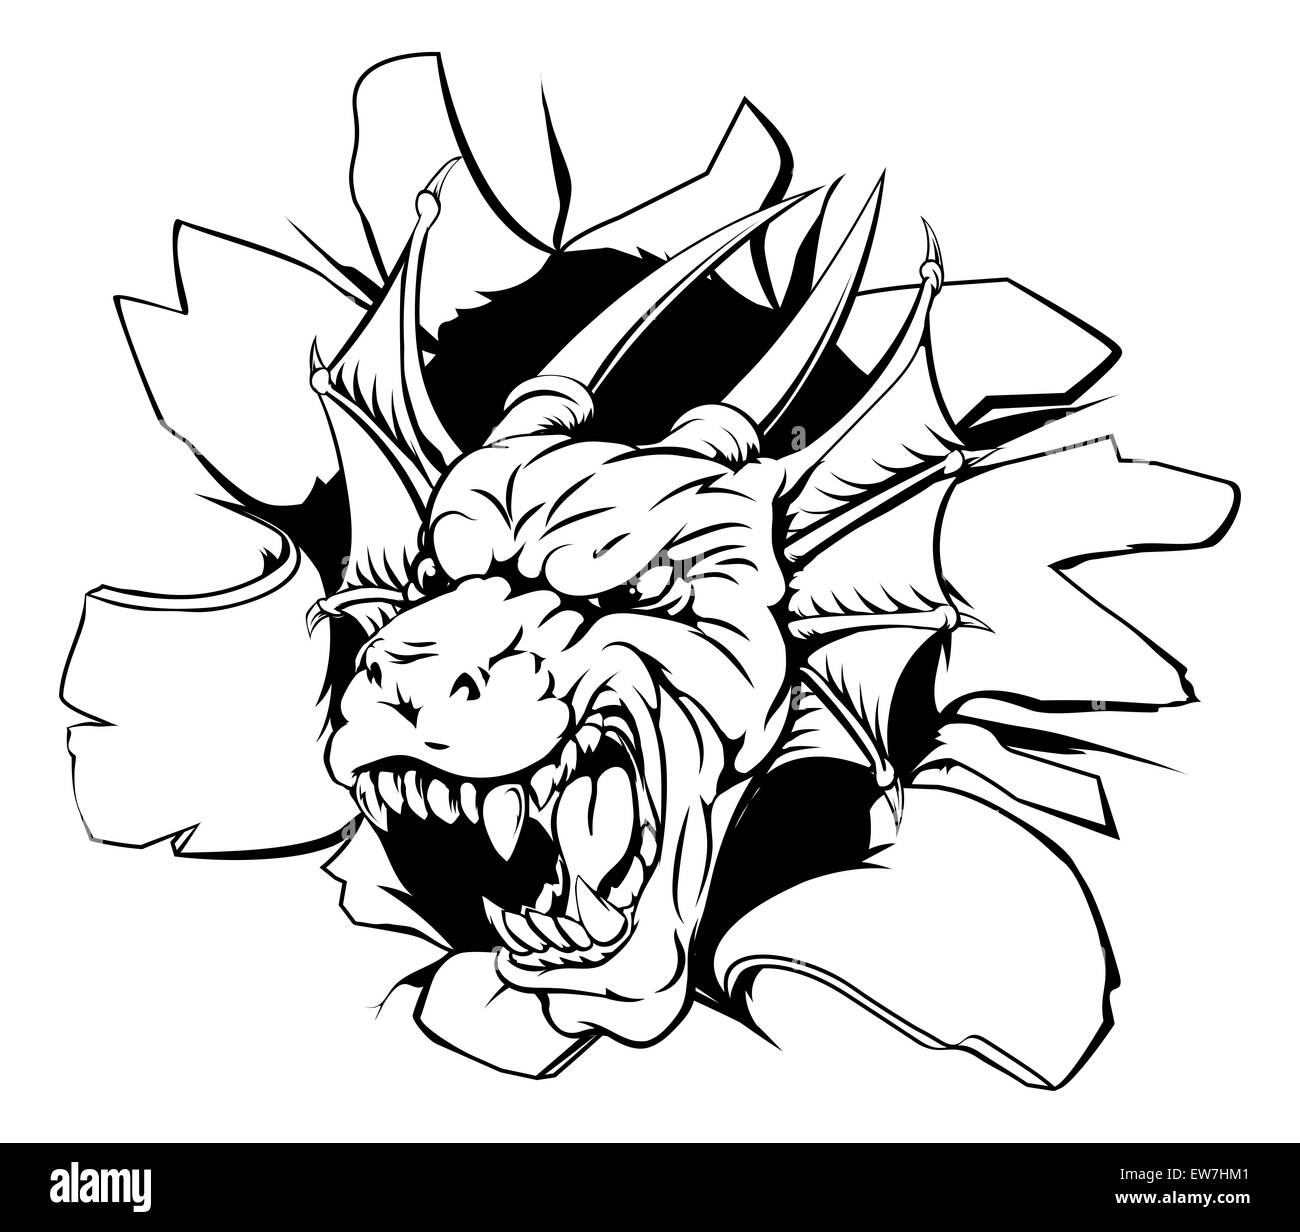 An illustration of a snarling dragon head bursting through a wall Stock Photo